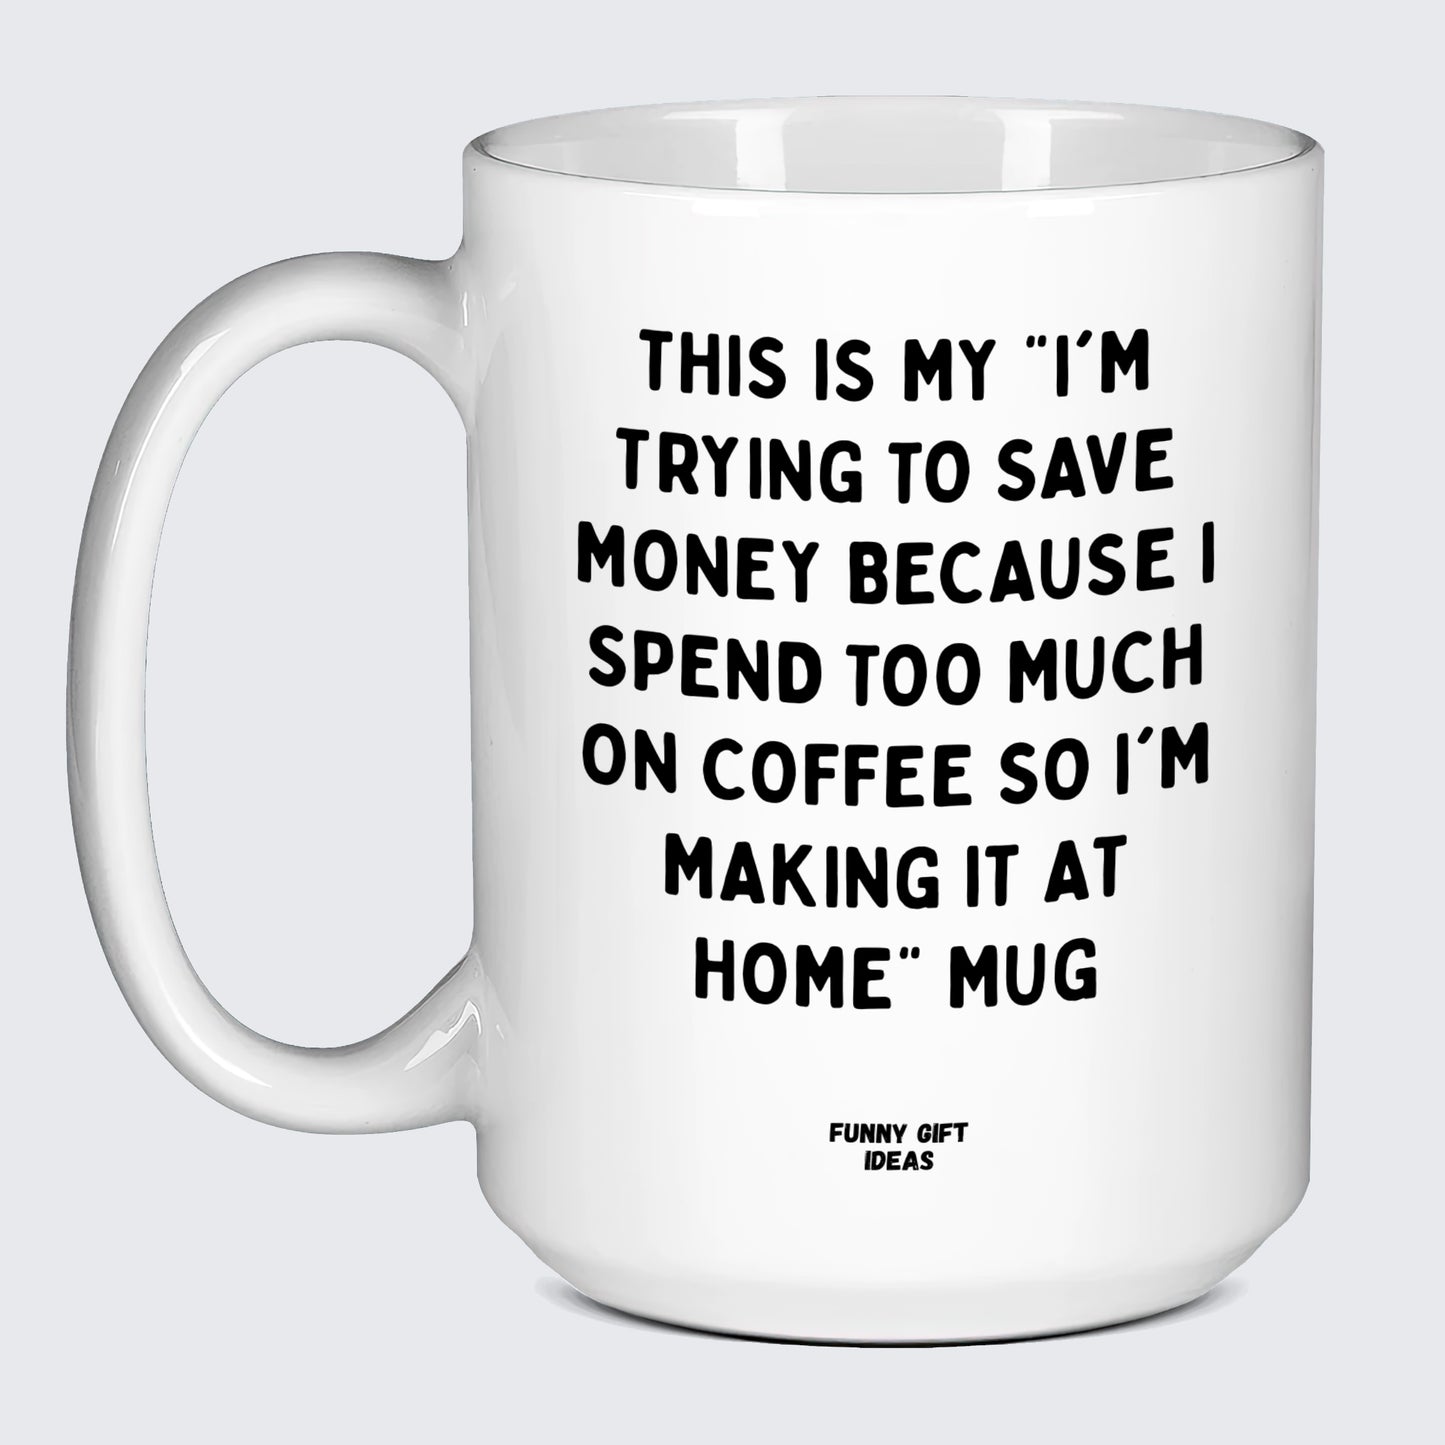 Gift for Coffee Lover This is My I'm Trying to Save Money Because I Spend Too Much on Coffee So I'm Making It at Home Mug - Funny Gift Ideas